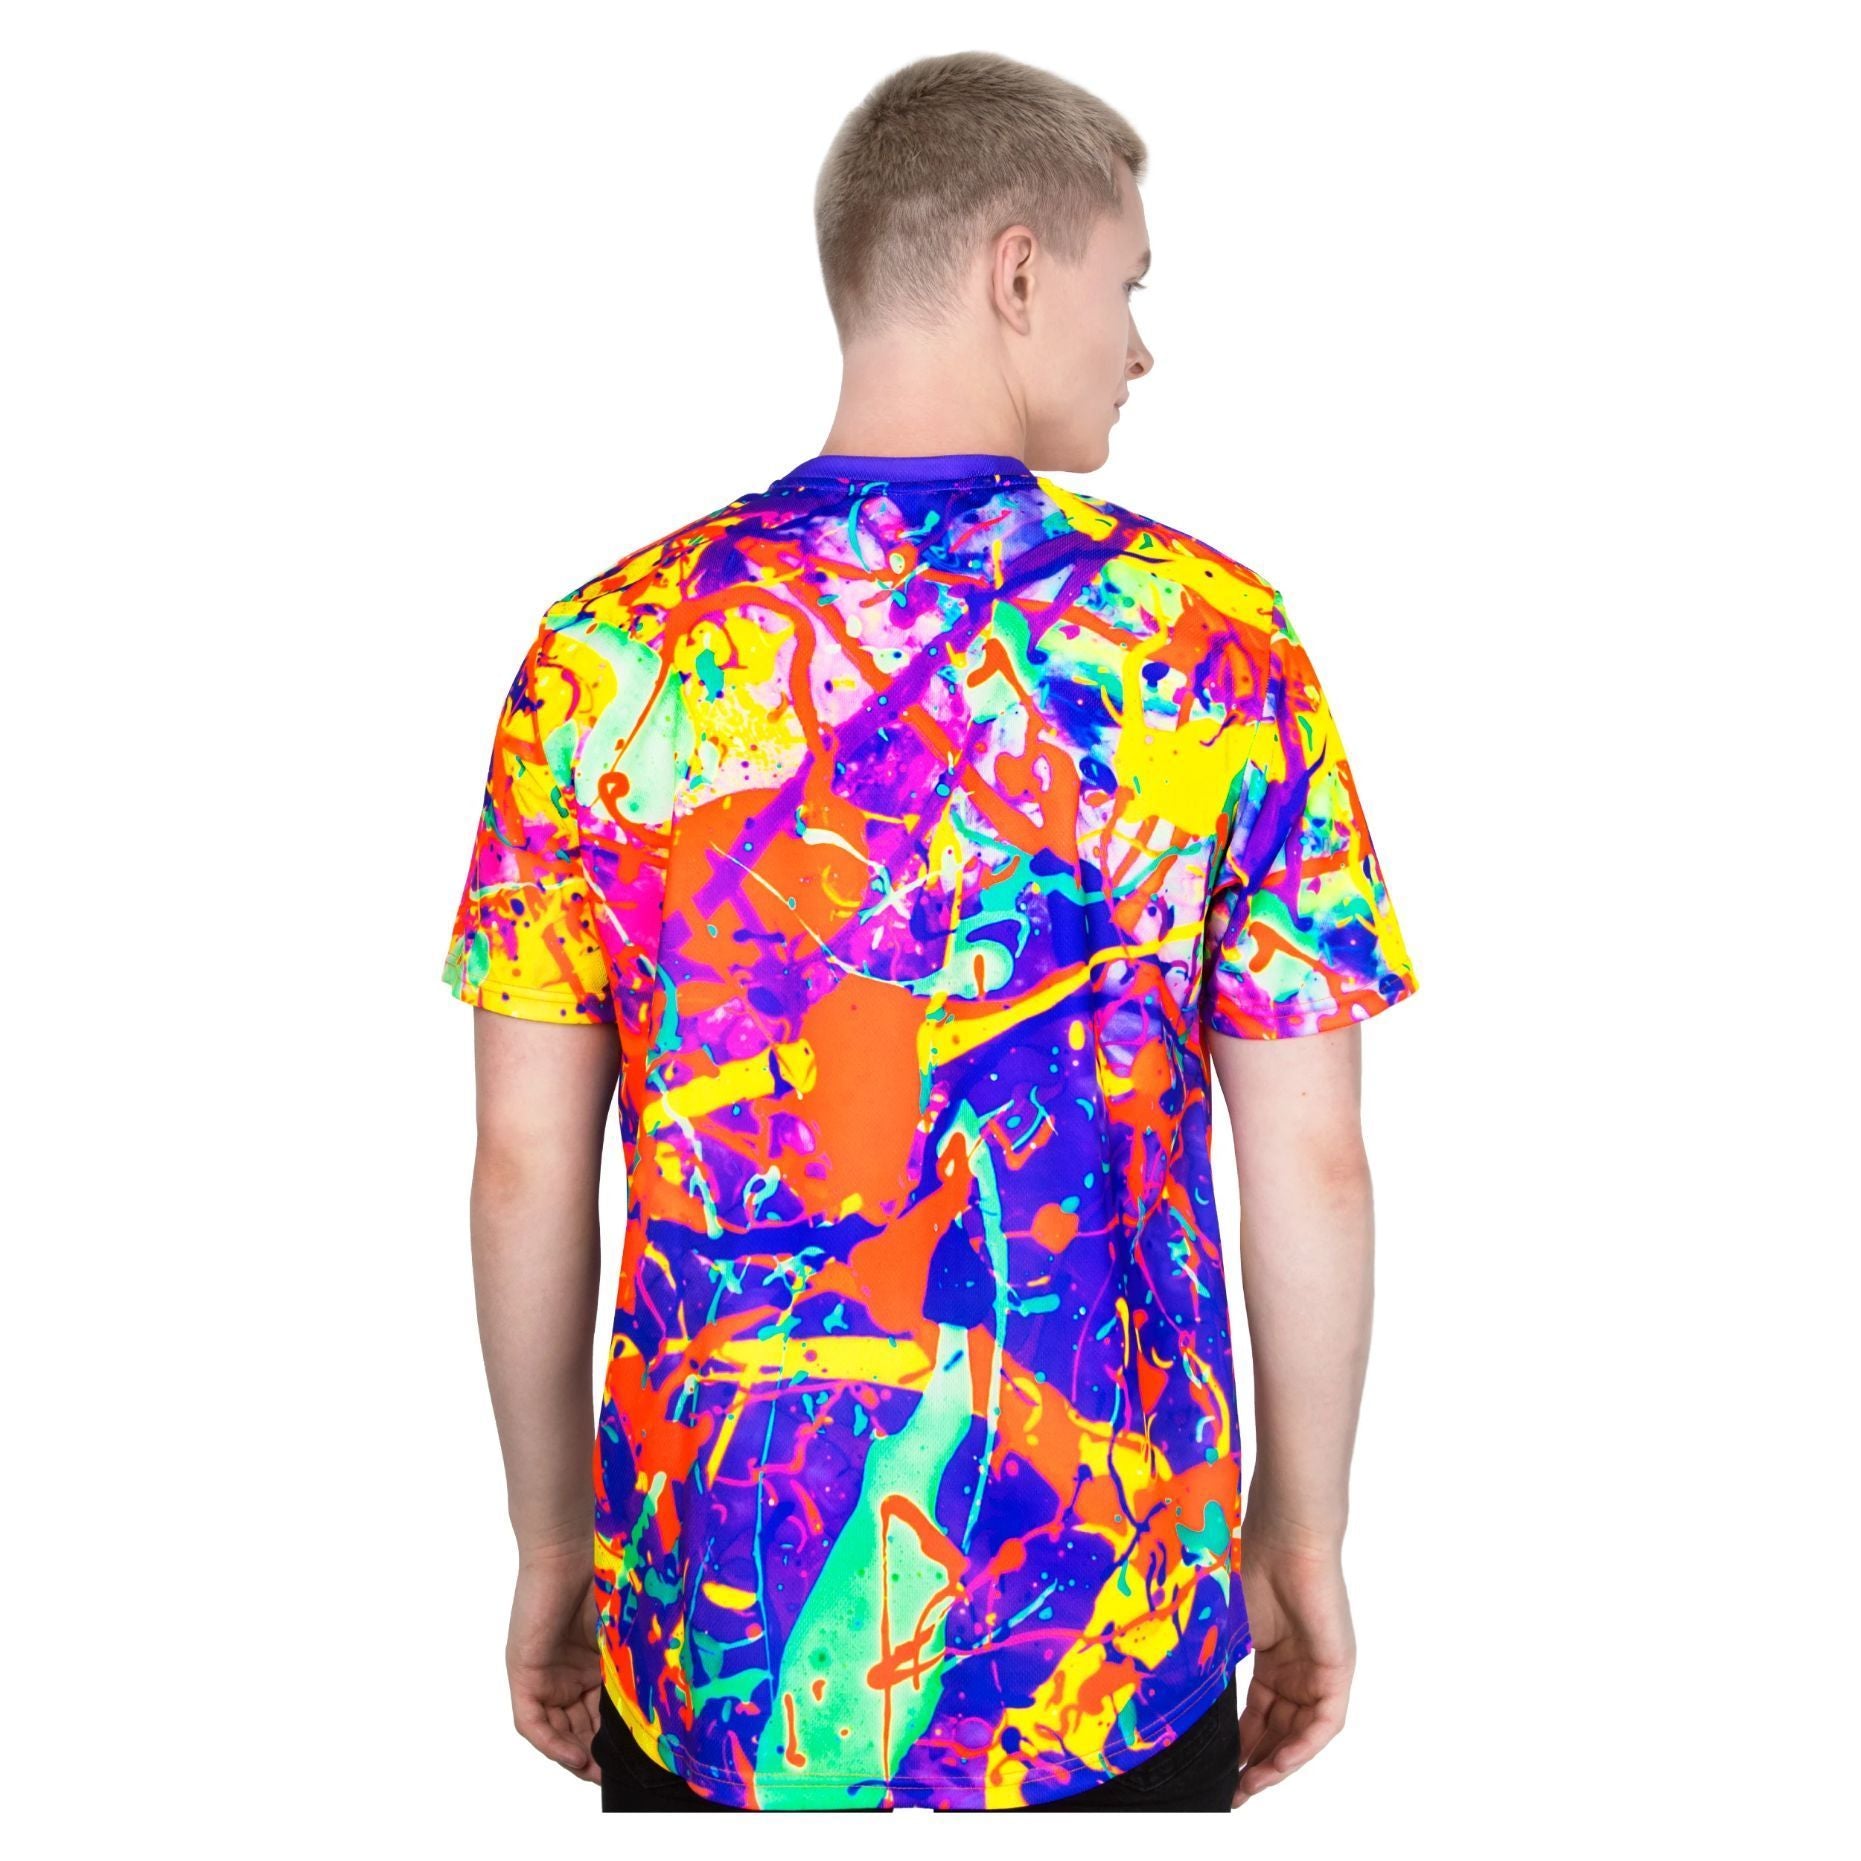 Neon Party T Shirt Design Glow in UV Fluorescent New Reality ts38